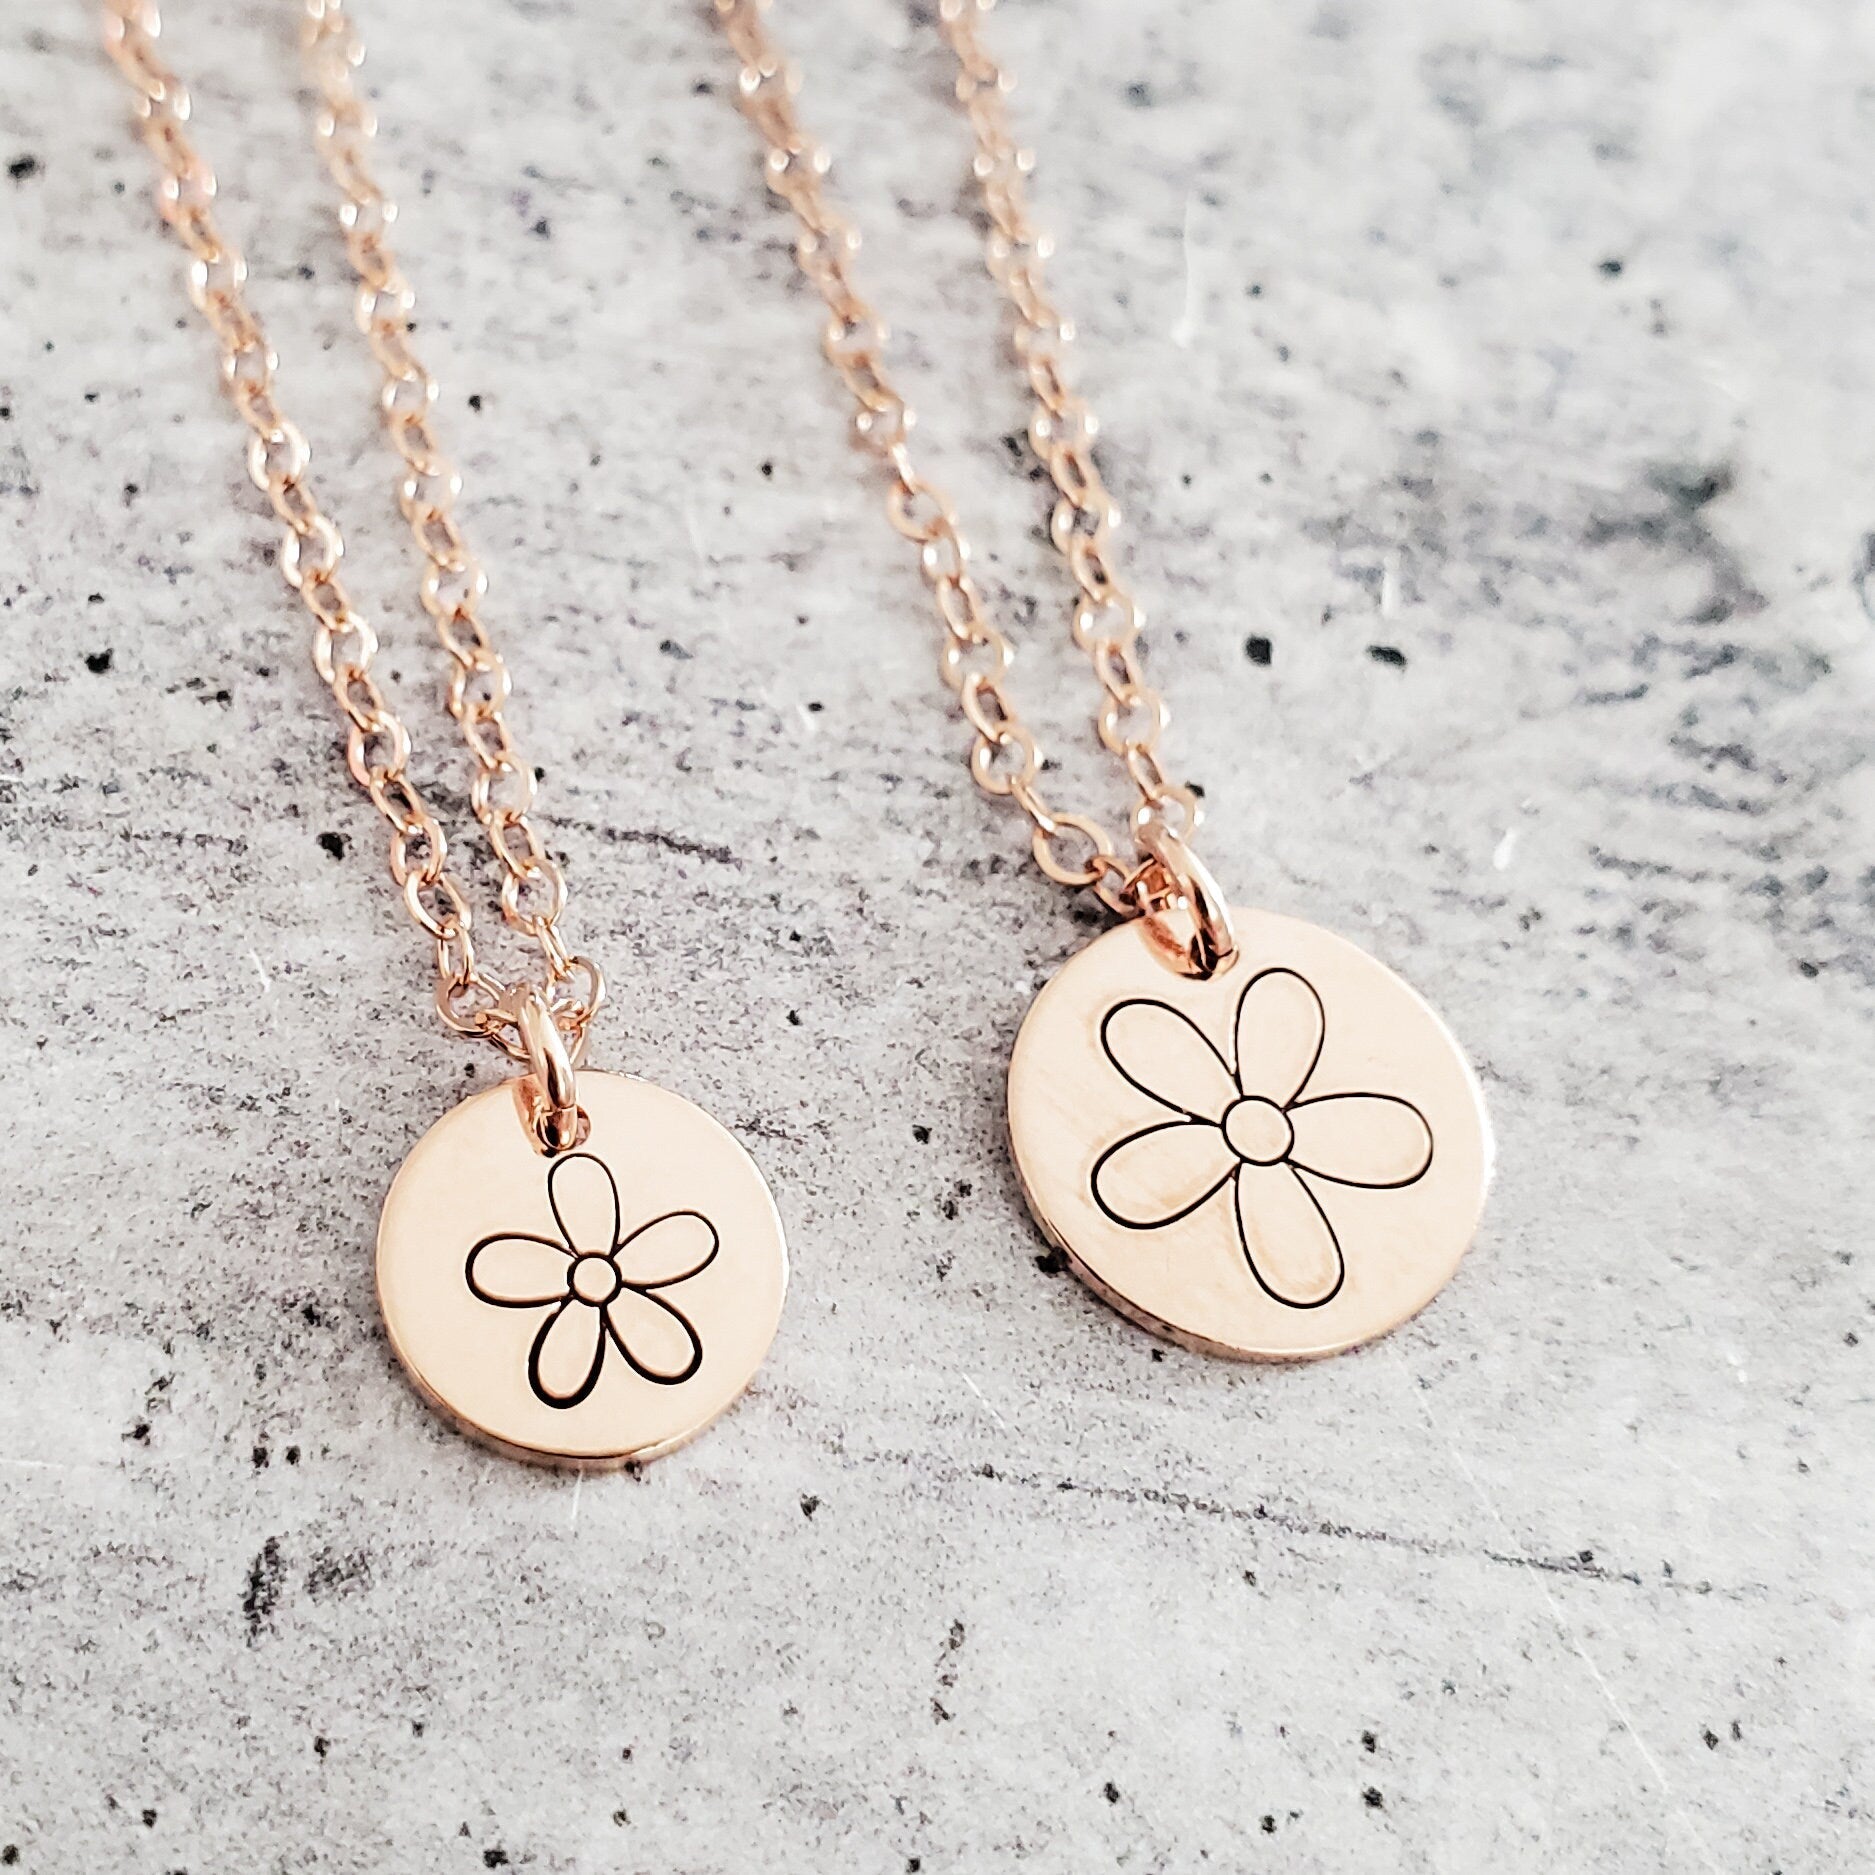 Gold Daisy Necklace - Minimalist Silver Daisy Charm Necklace - Initial Necklace with Daisy Flower - Rose Gold Dainty Daisy Necklace for Her